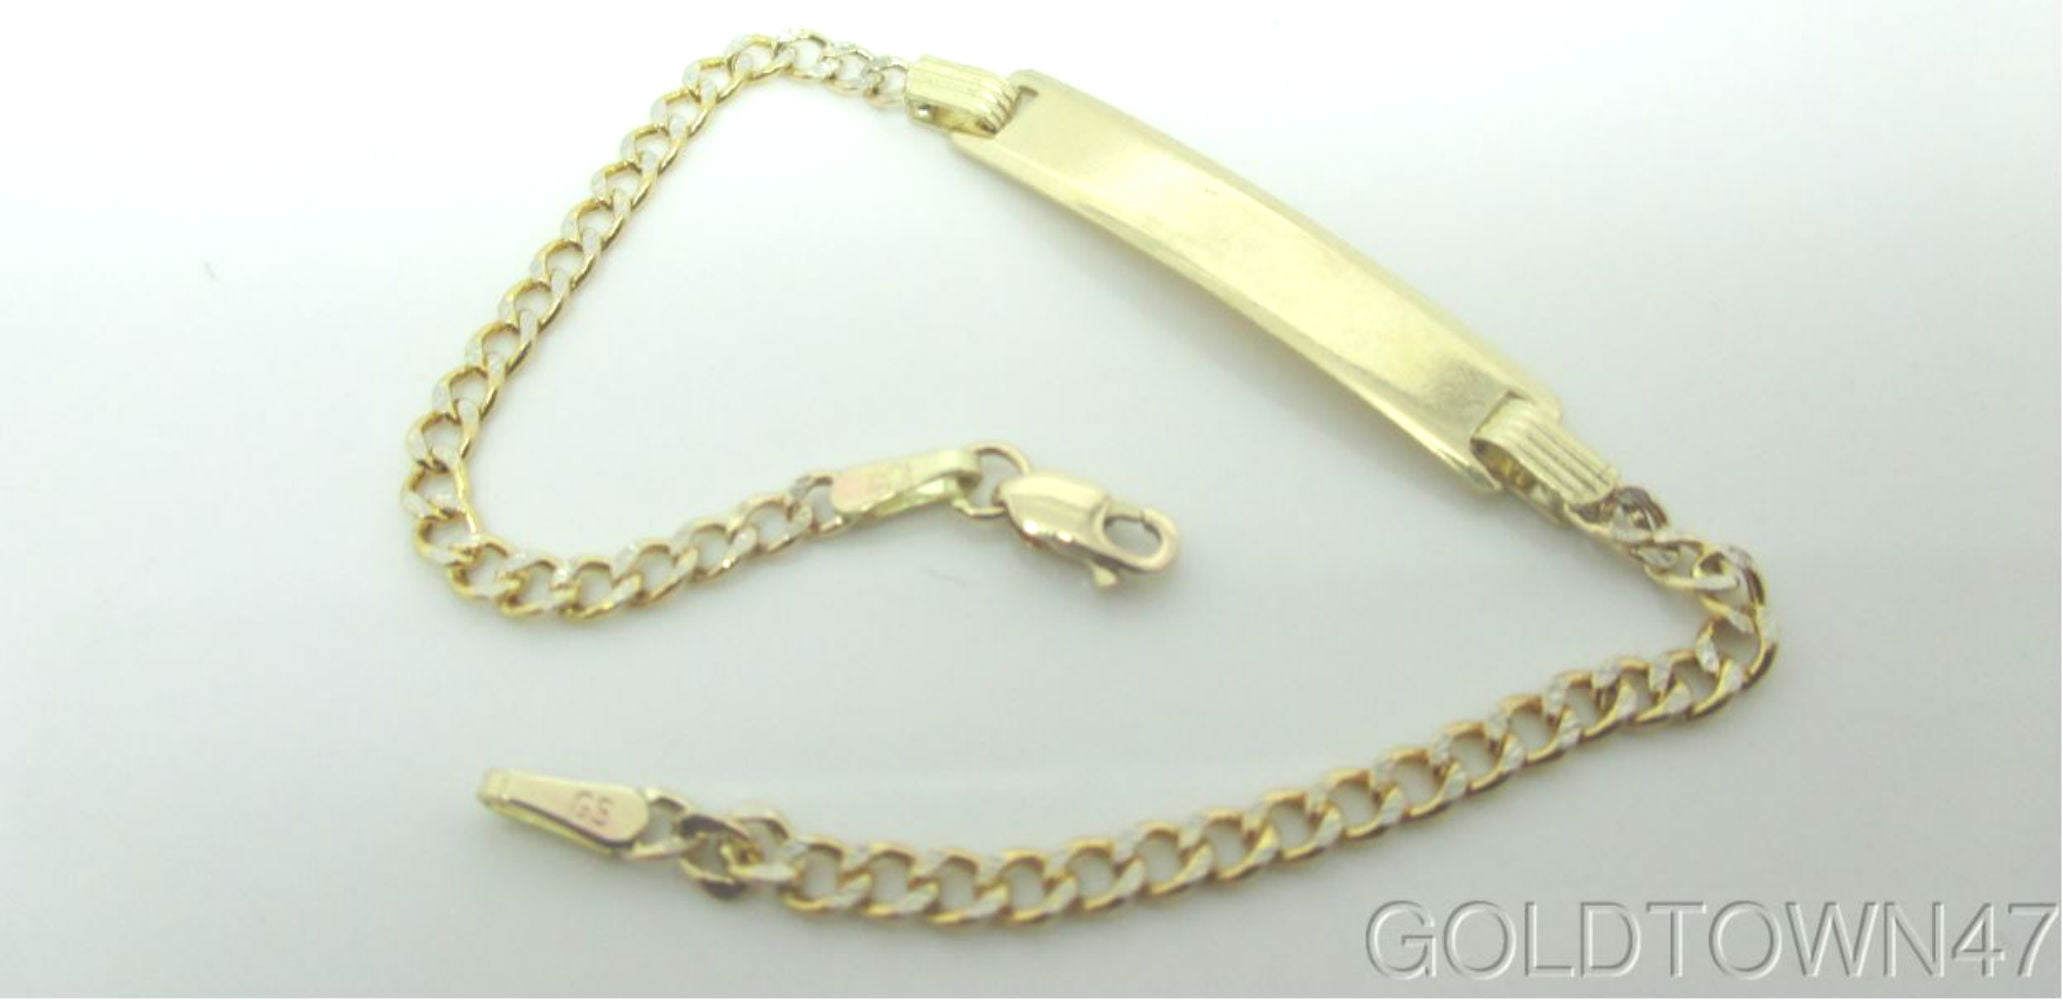 FREE ENGRAVING 10K Yellow Gold 5.5 Inch Cuban Chain Child Kid Baby ID Bracelet